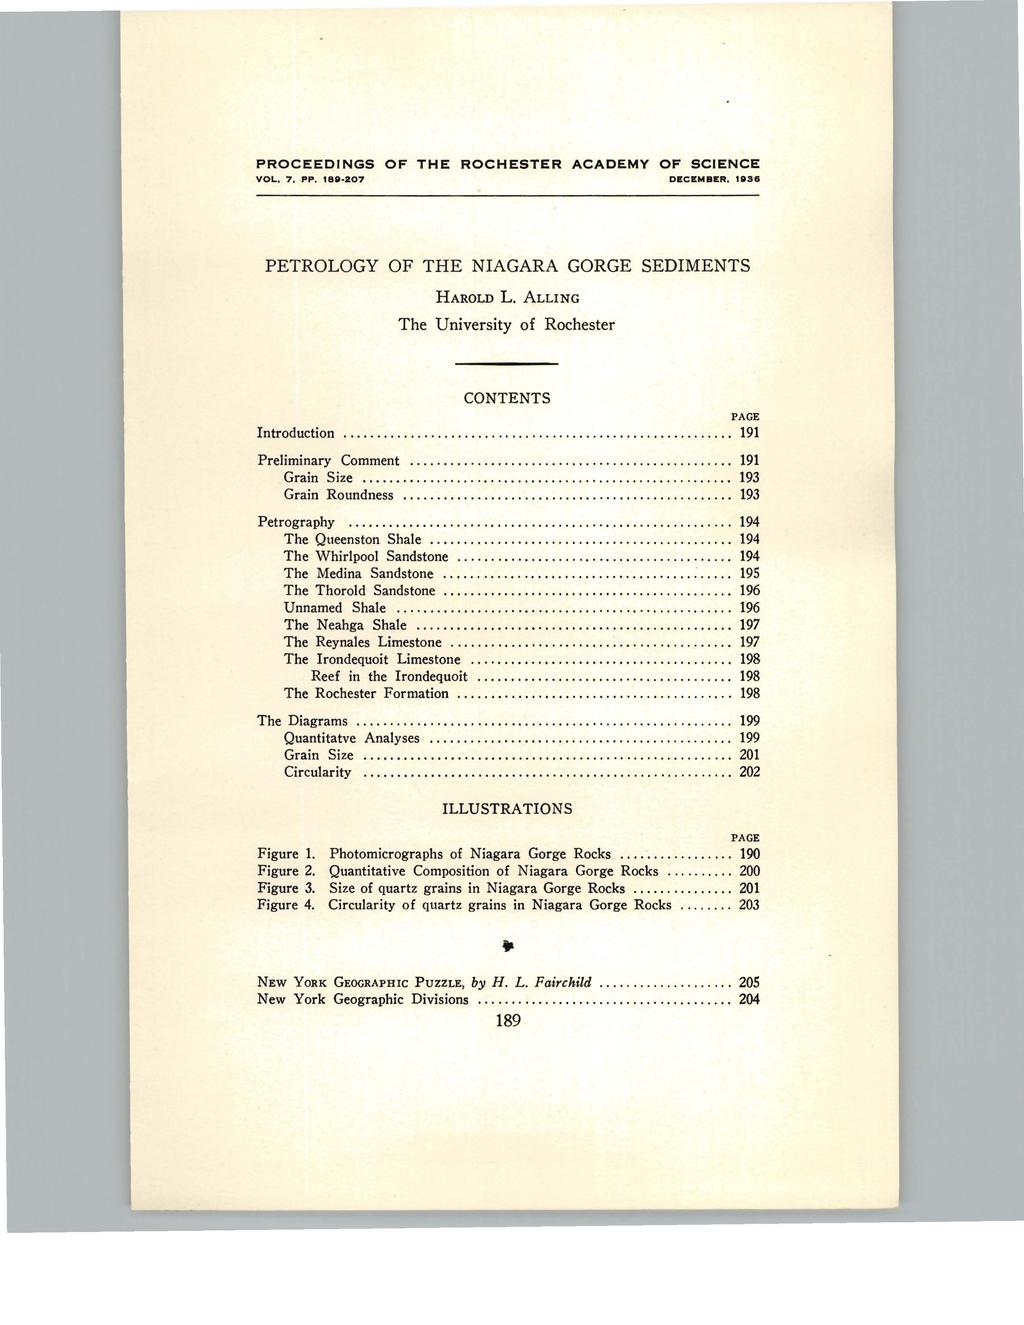 PROCEEDINGS OF THE ROCHESTER ACADEMY OF SCIENCE VOL. 7. PP. '88 207 DECEMBER. 11136 PETROLOGY OF THE NIAGARA GORGE SEDIMENTS HAROLD L.